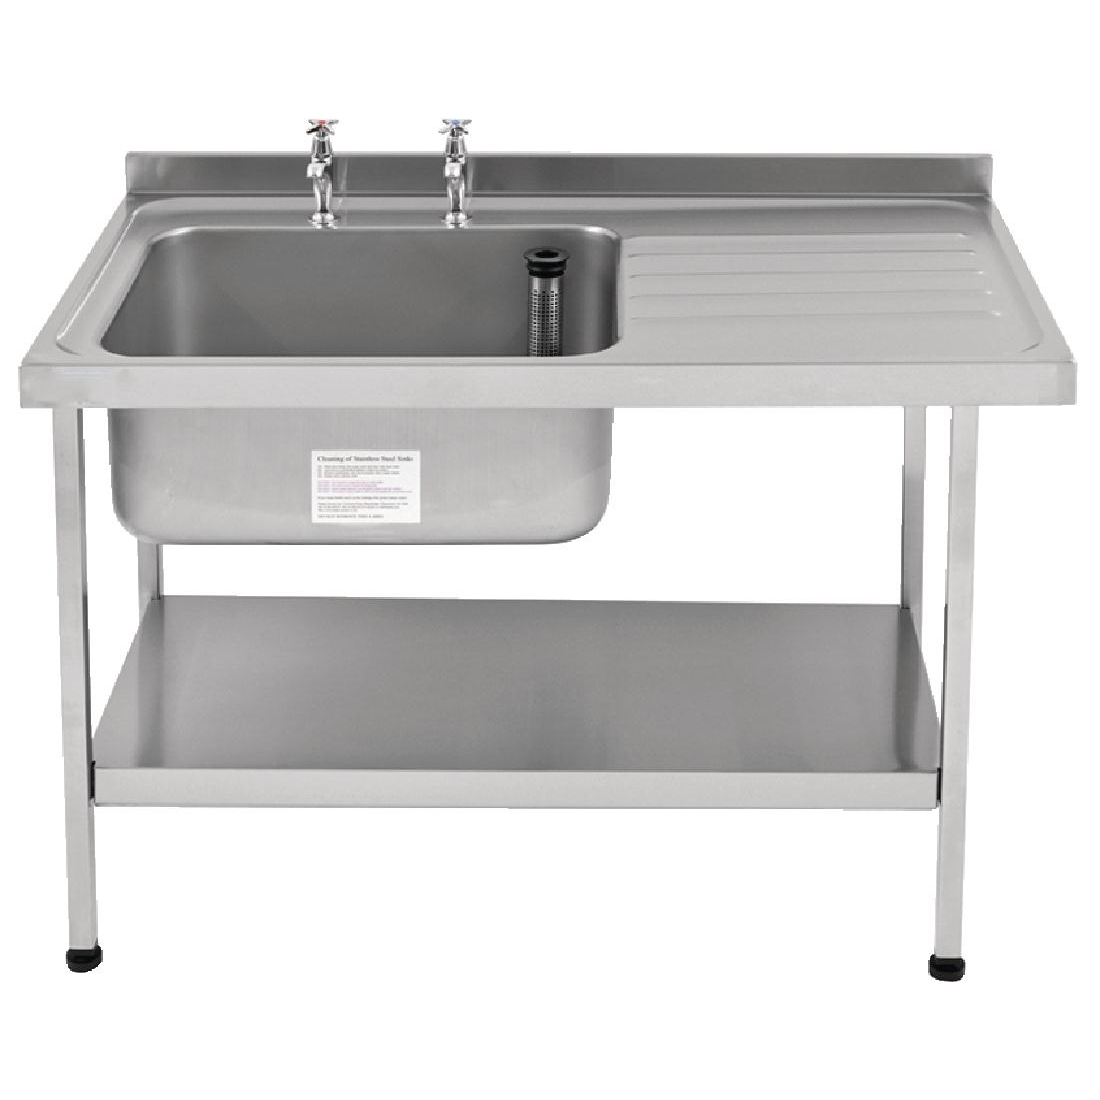 Franke Sissons Stainless Steel Sink Right Hand Drainer 1200x650mm